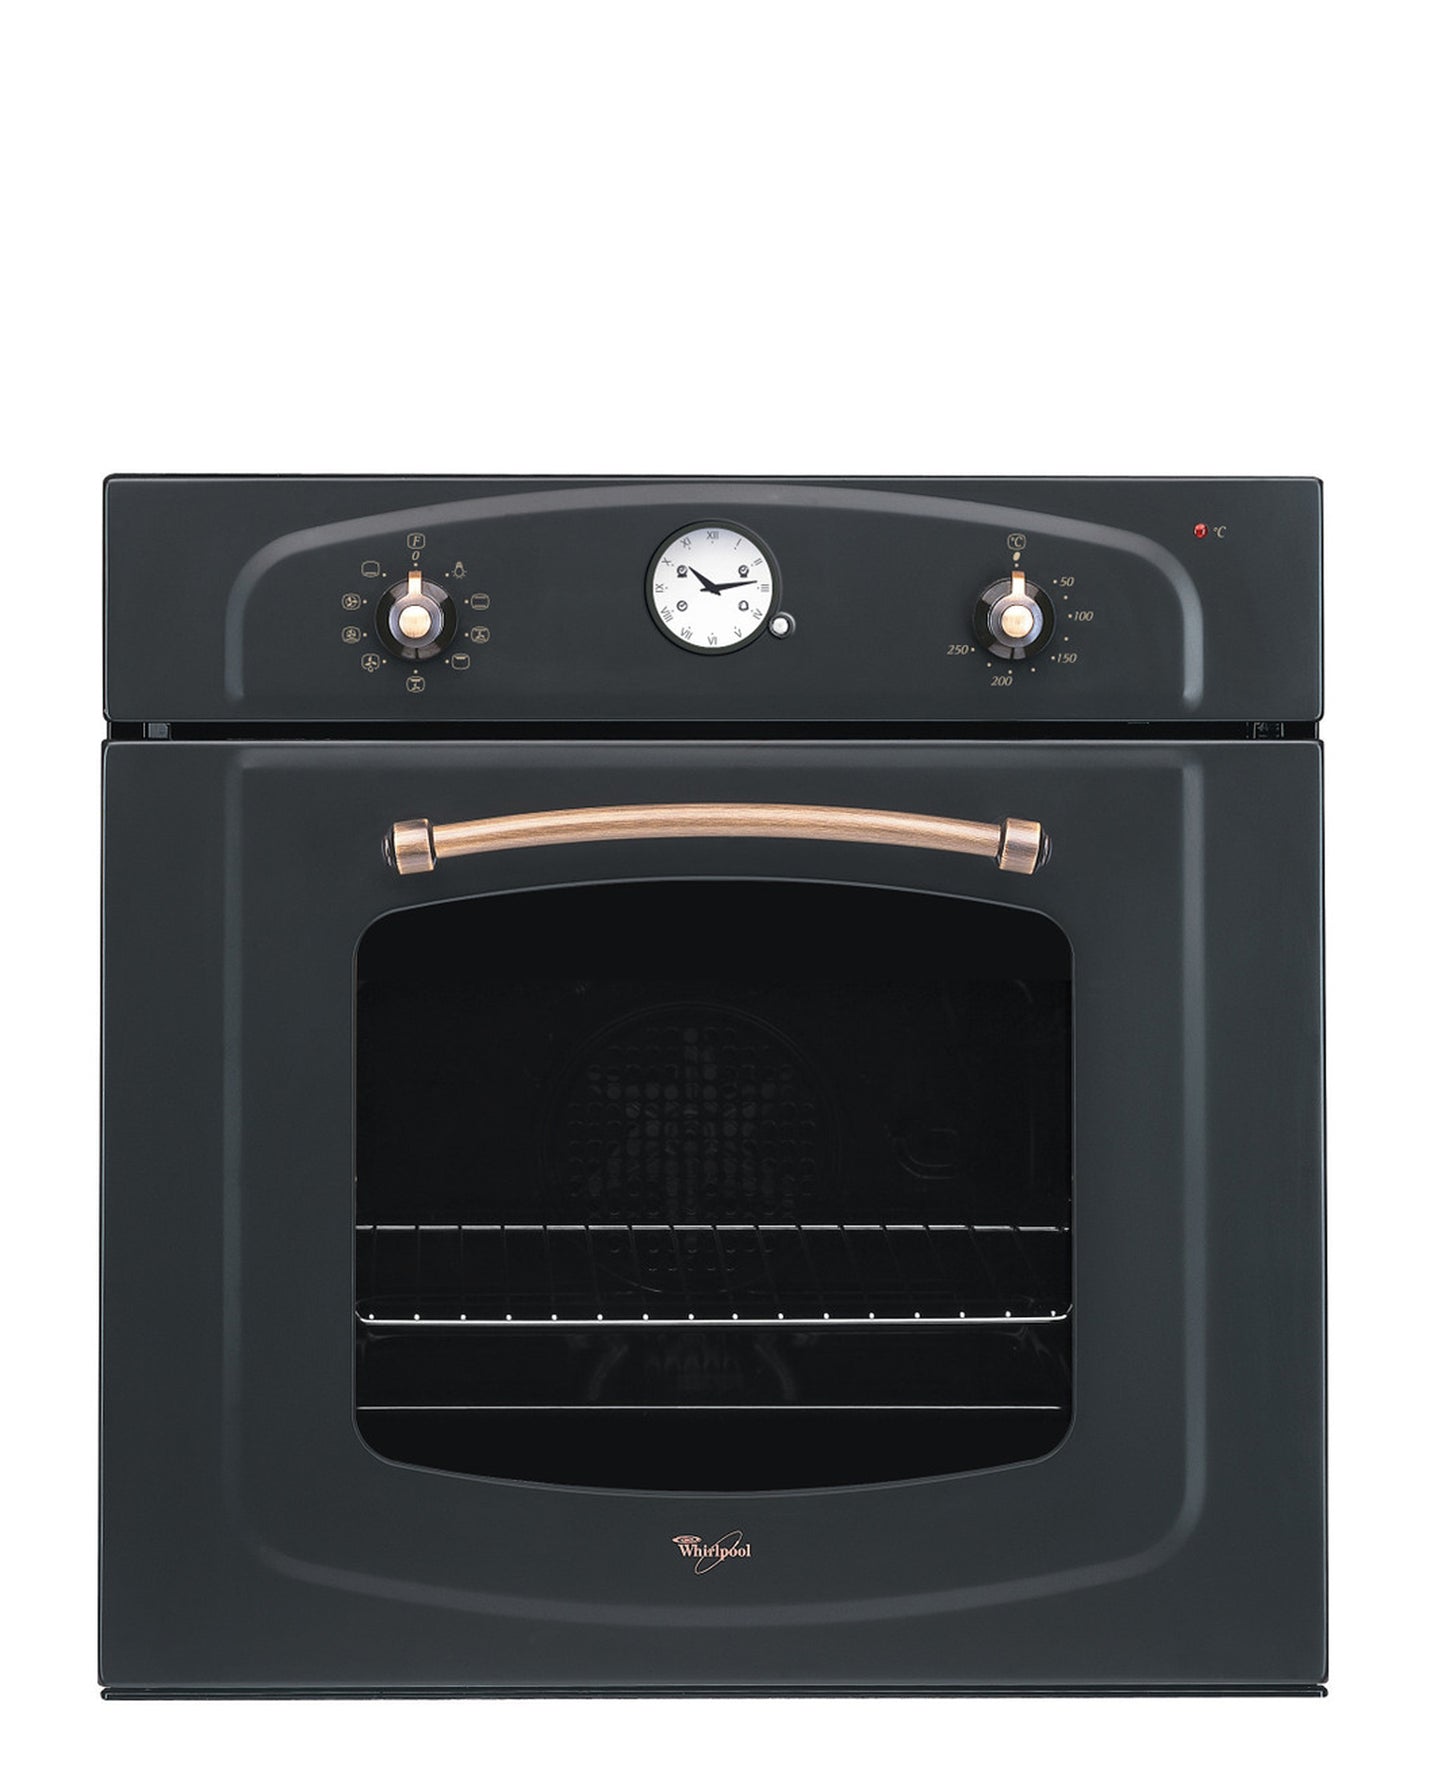 Whirlpool Oven - AKP 288